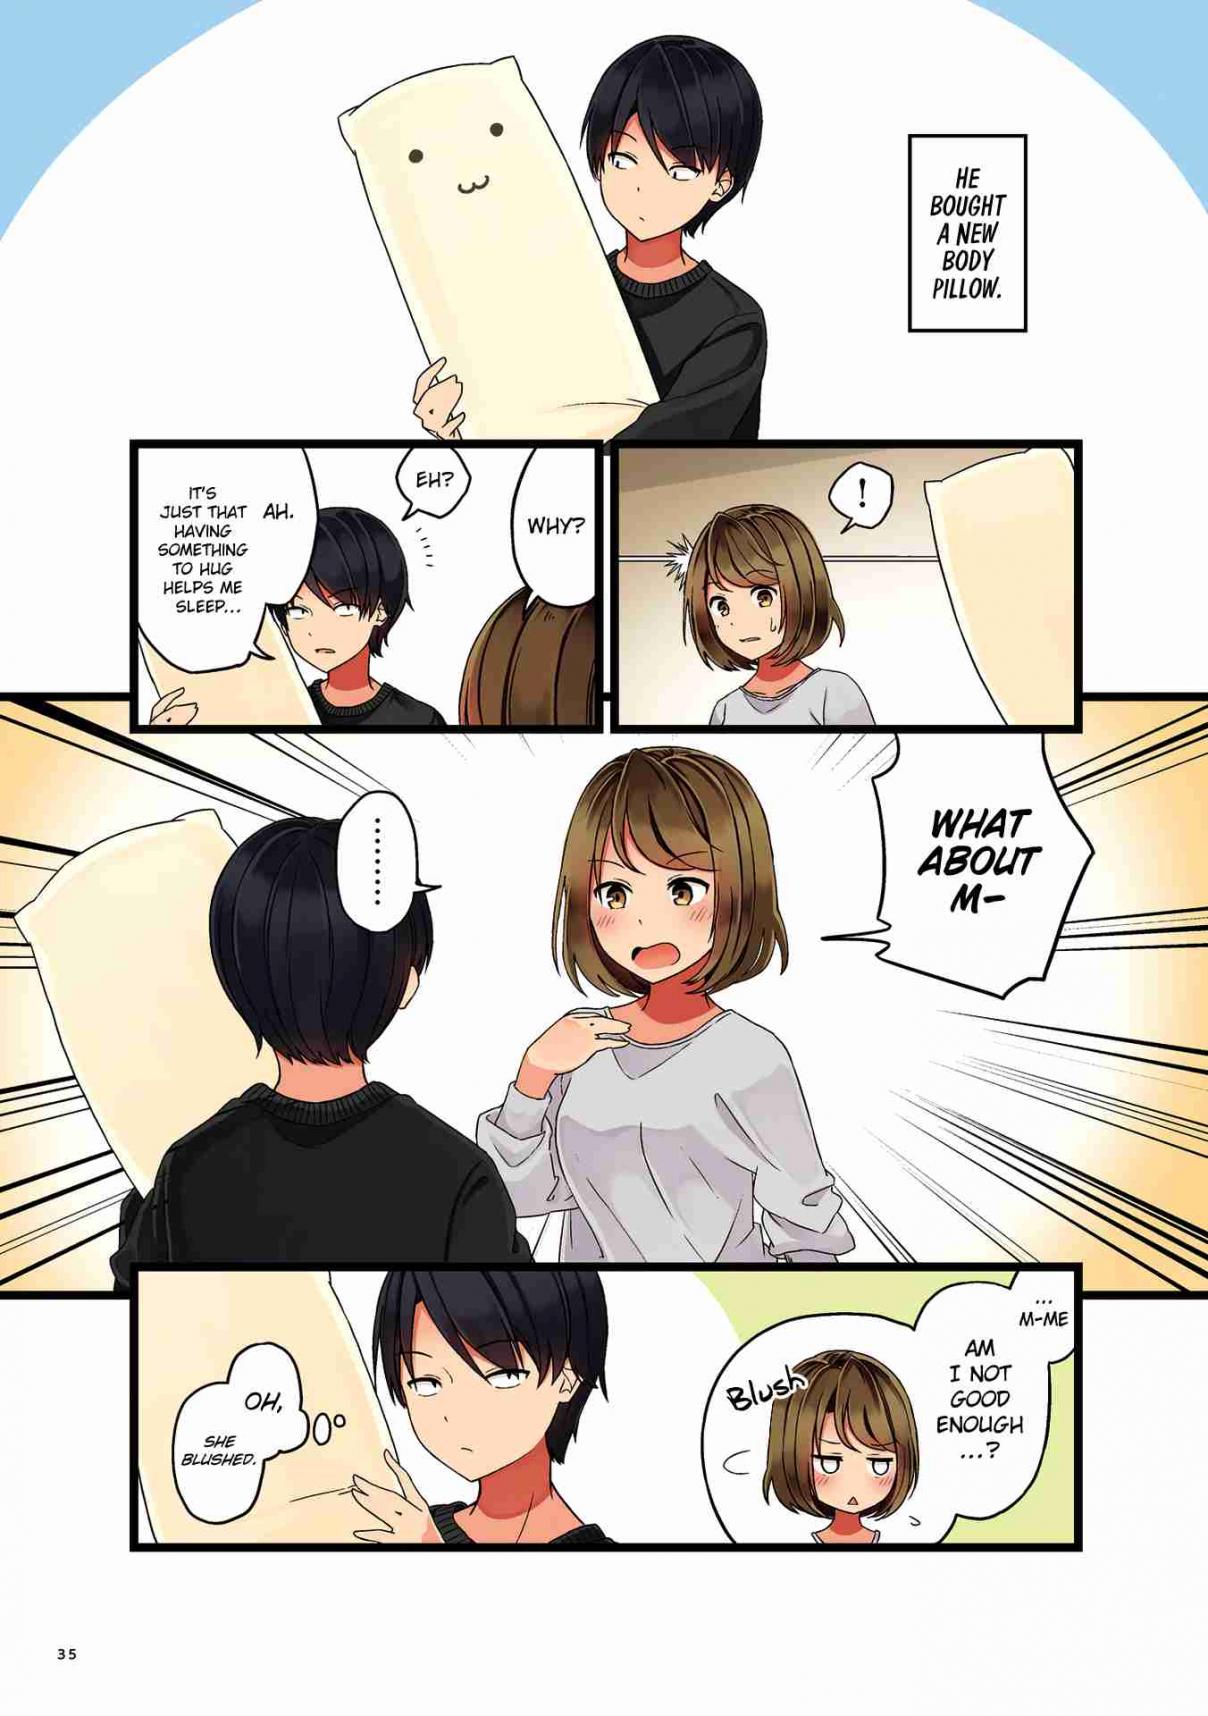 First Comes Love, Then Comes Marriage Vol. 1 Ch. 3 My Fiance Is Jealous of a Body Pillow